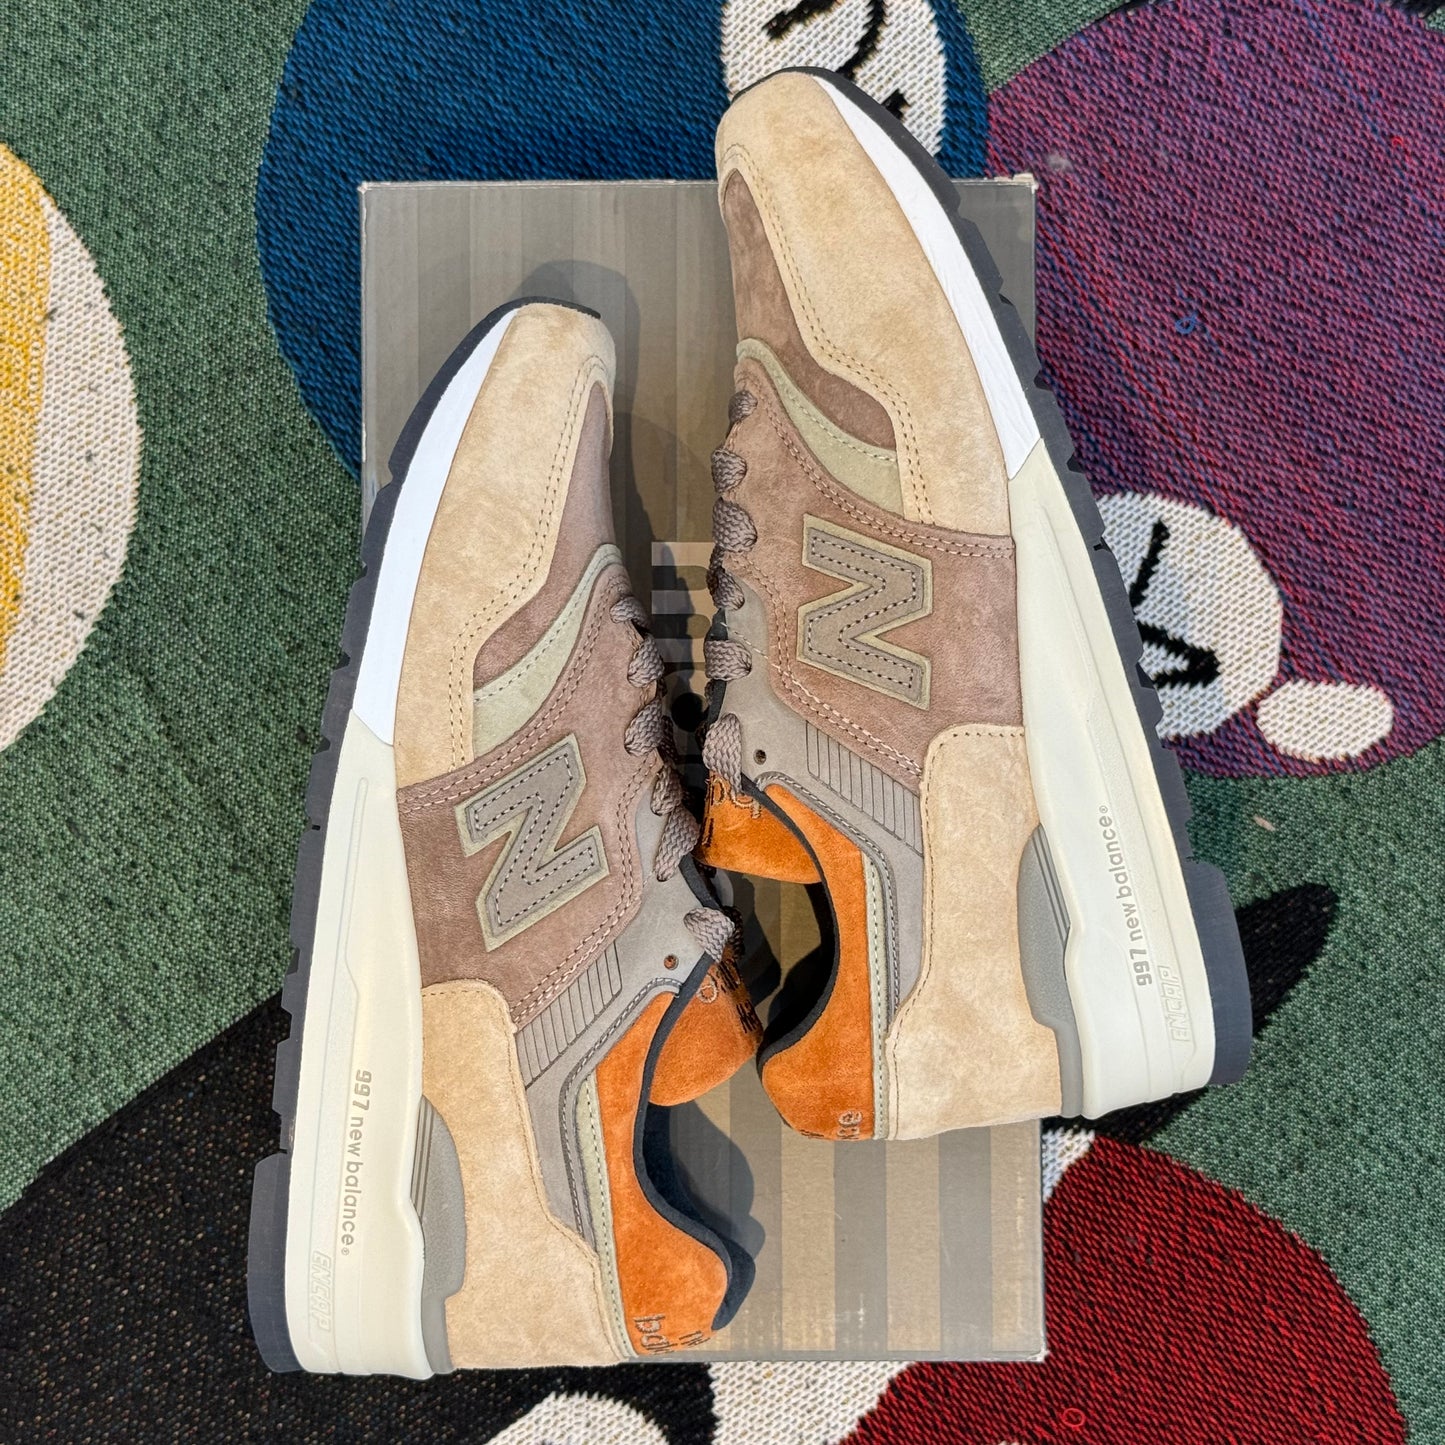 New Balance 997 "Earth Tones" Made in USA Shoes